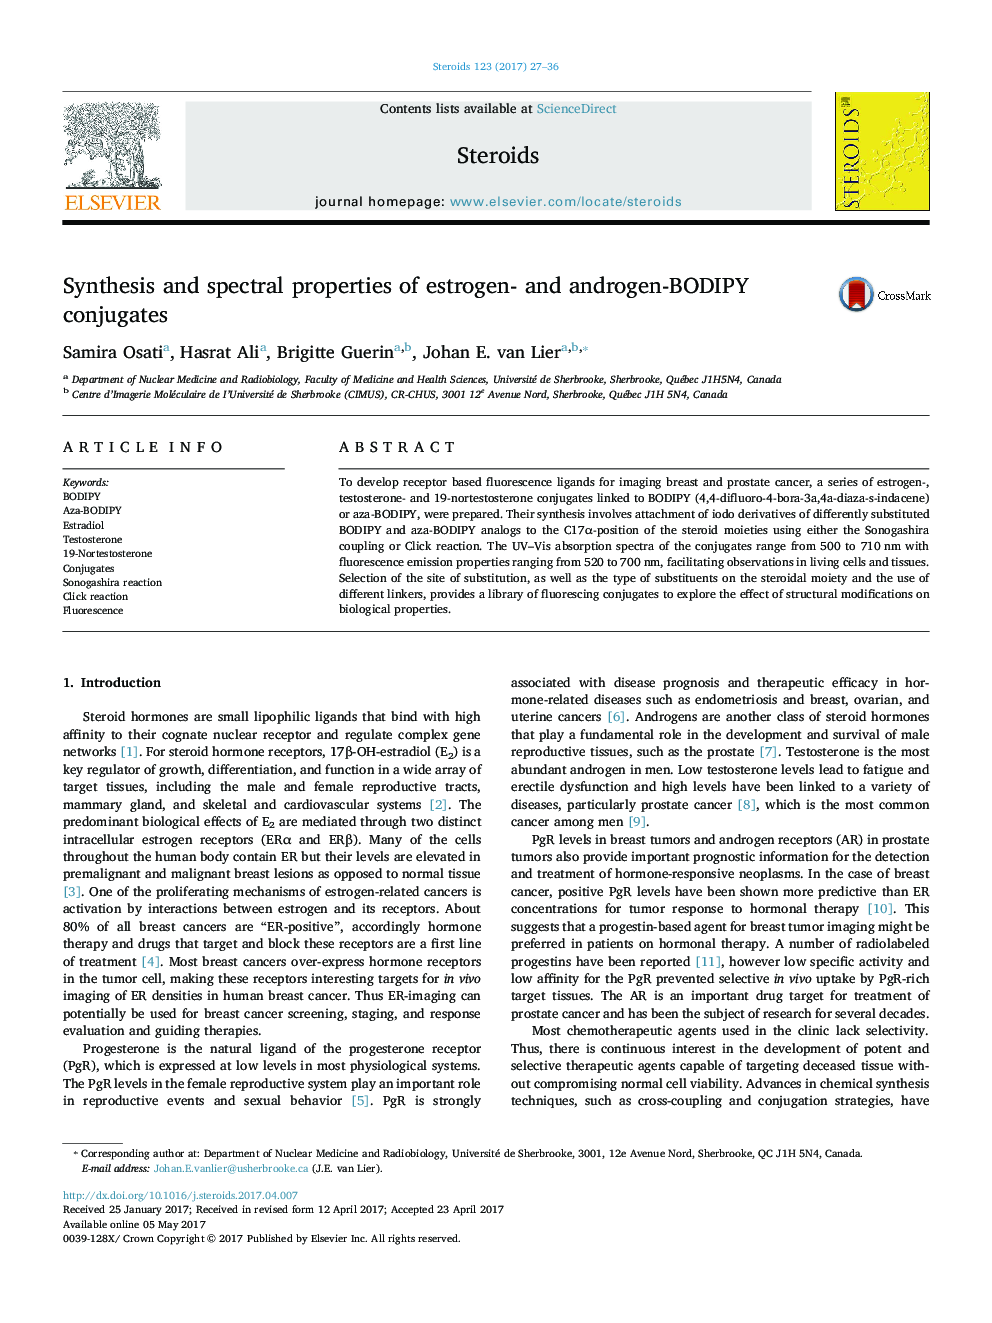 Synthesis and spectral properties of estrogen- and androgen-BODIPY conjugates